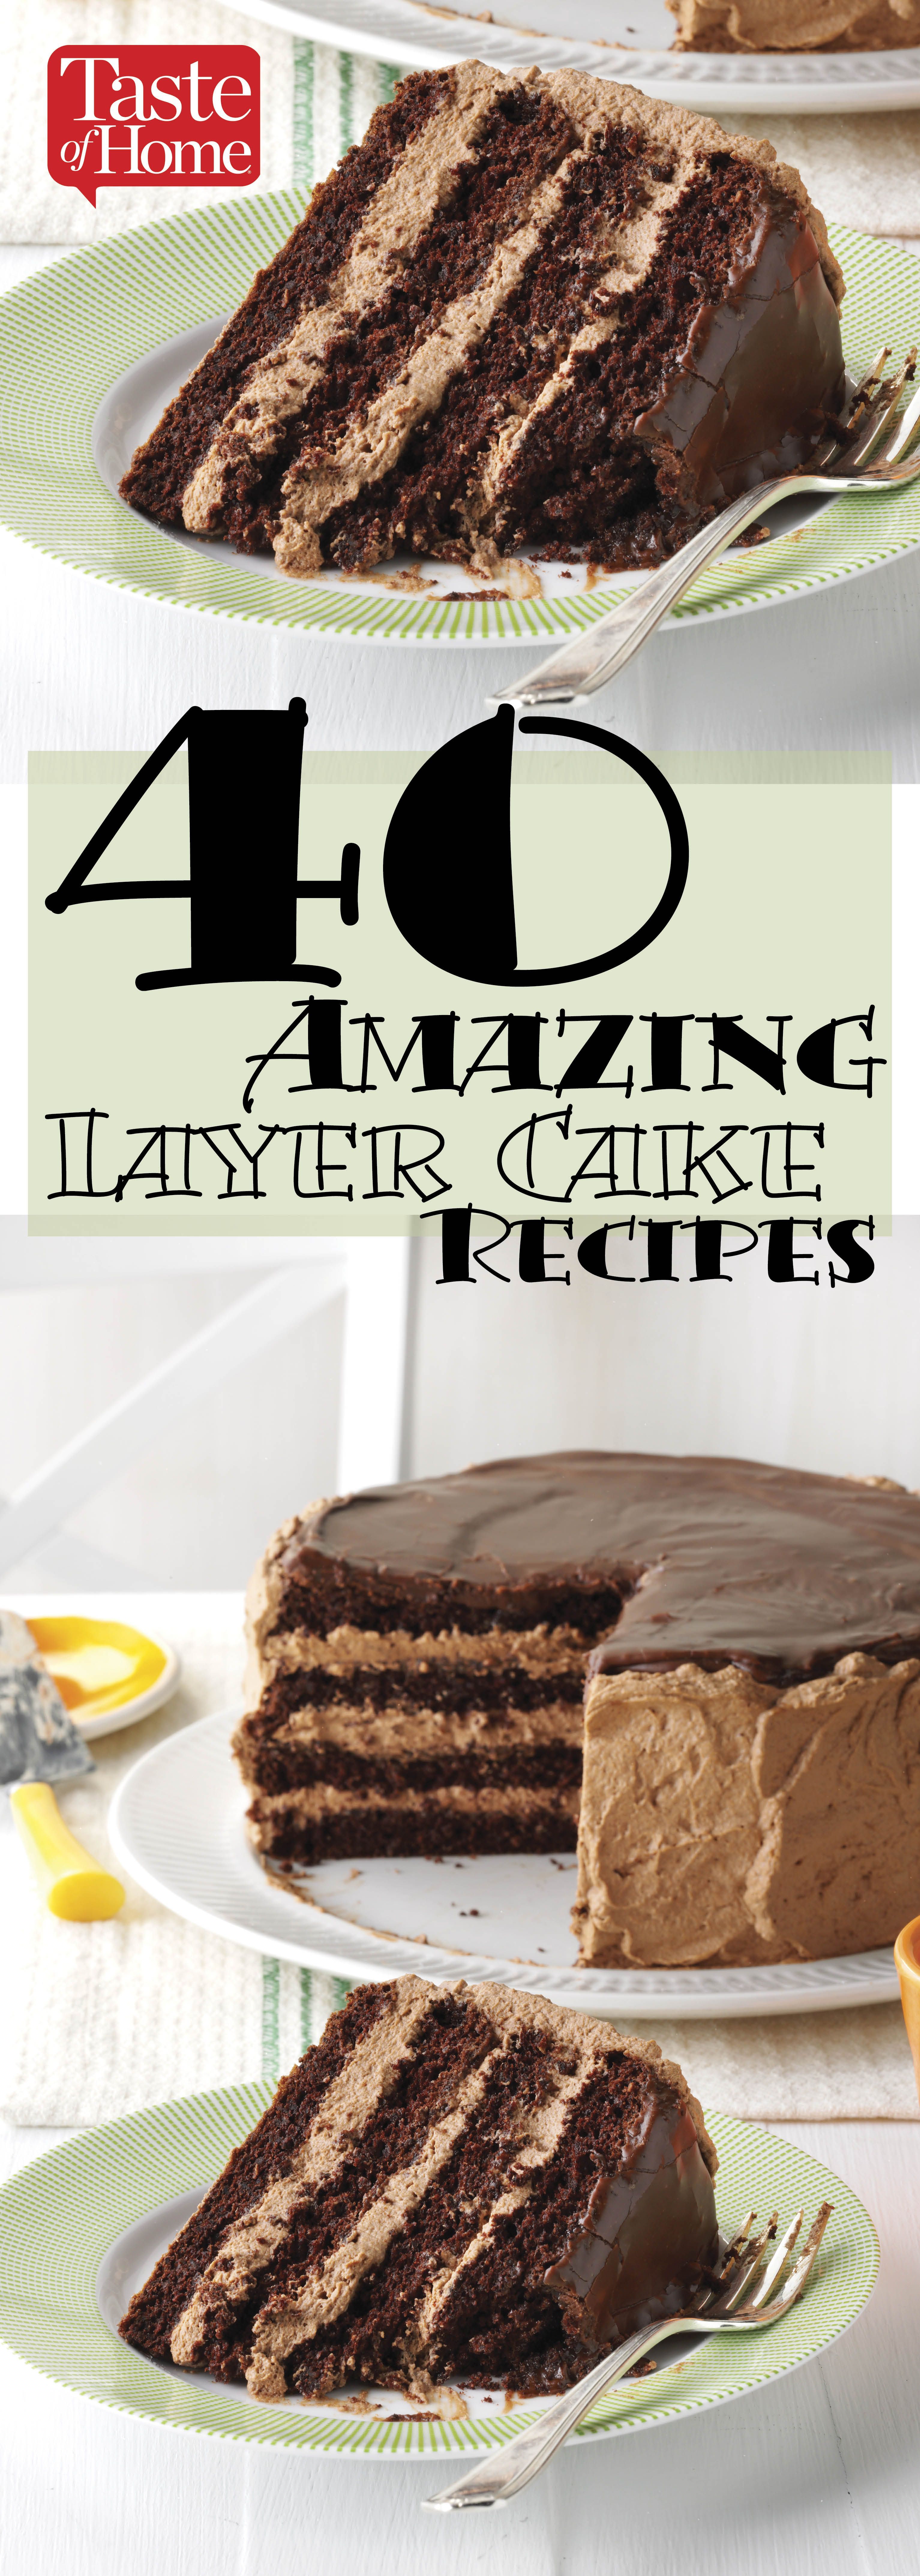 40 Amazing Layer Cake Recipes -   13 different cake Layer ideas